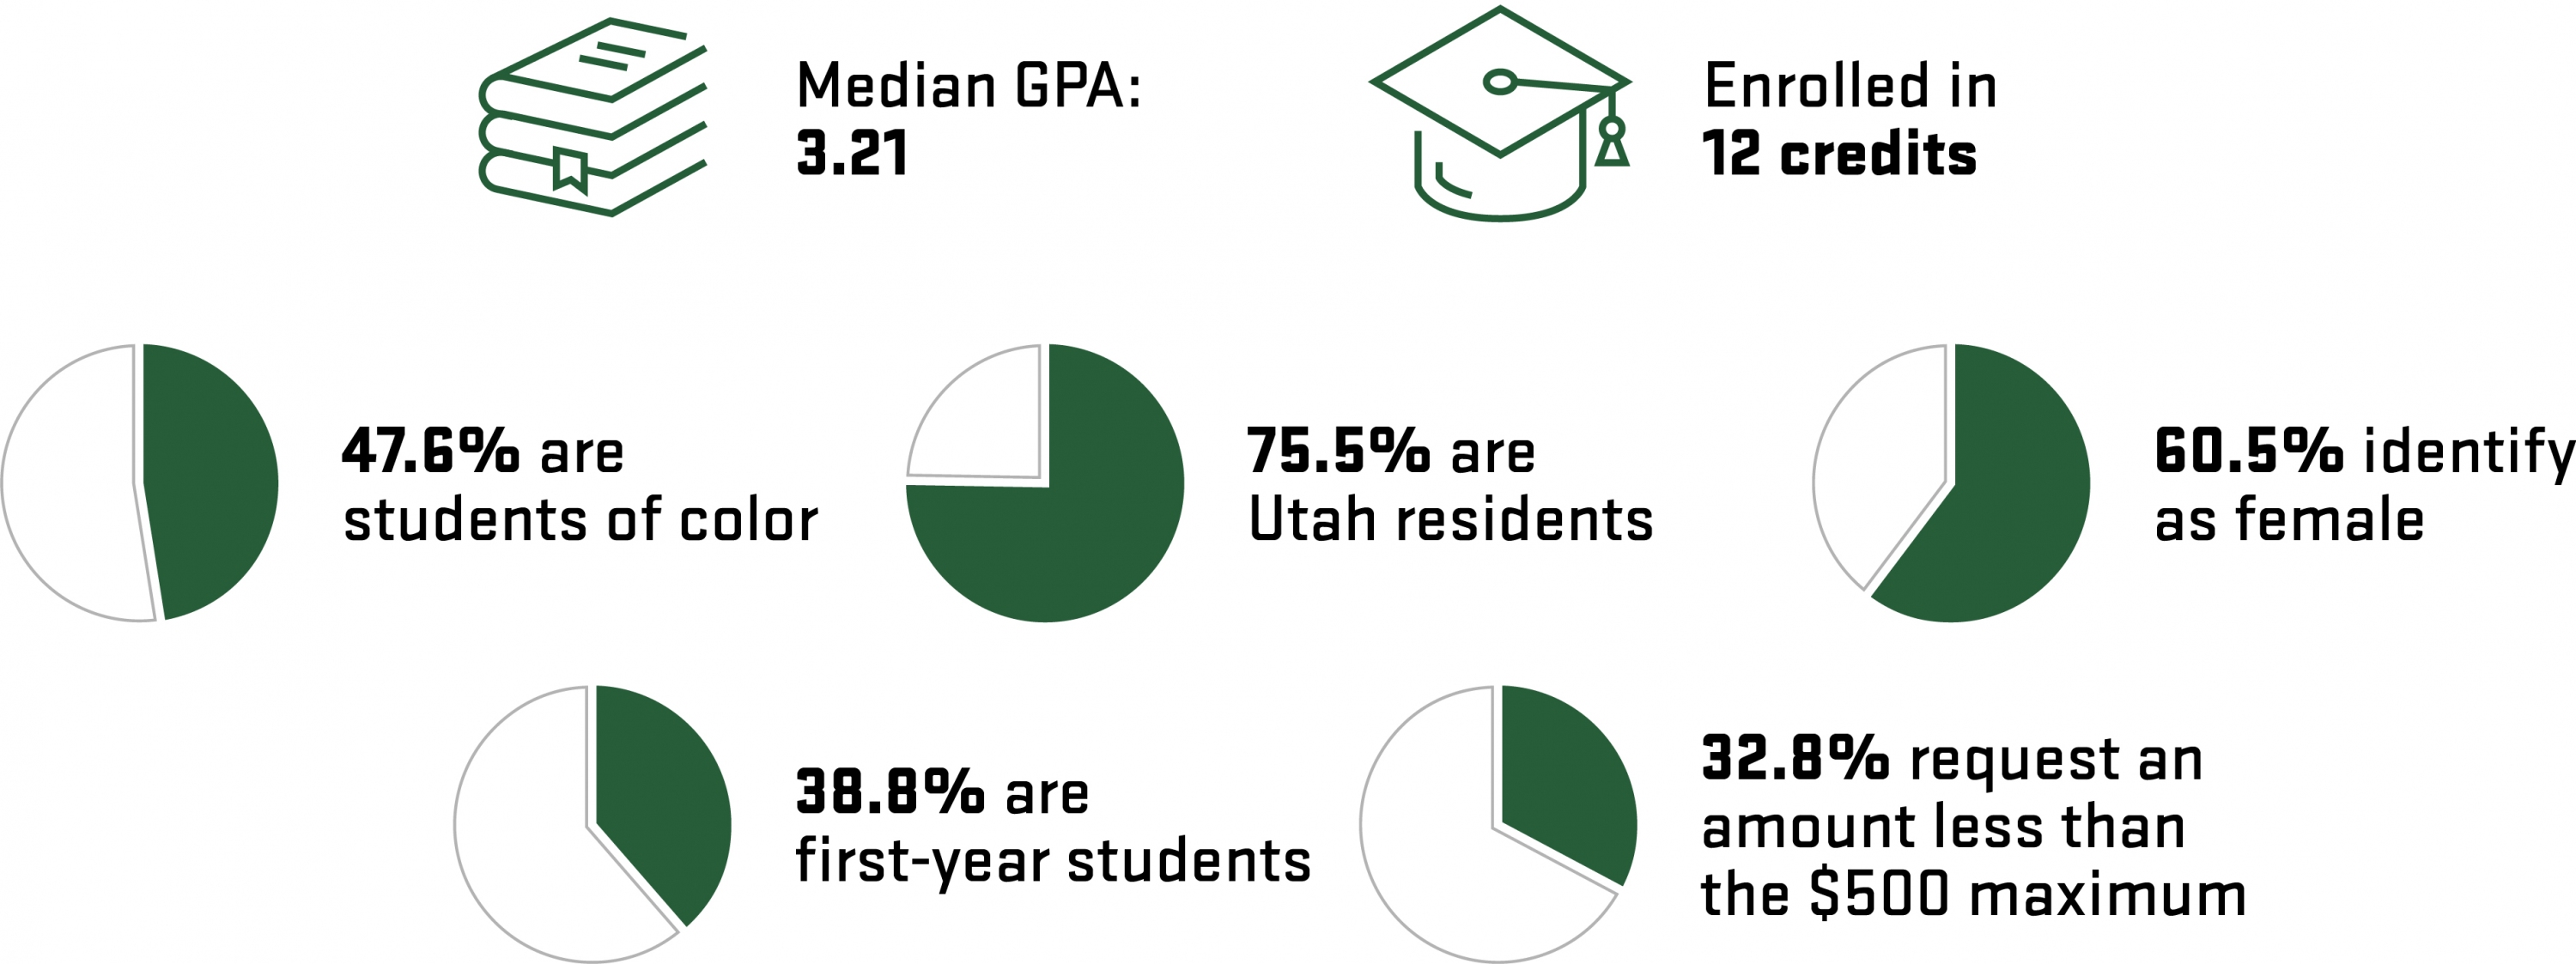 Infographic indicating: Median GPA 3.21; Enrolled in 12 credits; 47.6% are students of color; 75.5% are Utah residents; 60.5% identify as female; 38.8% are first-year students; 32.8% request an amount less than the $500 maximum.